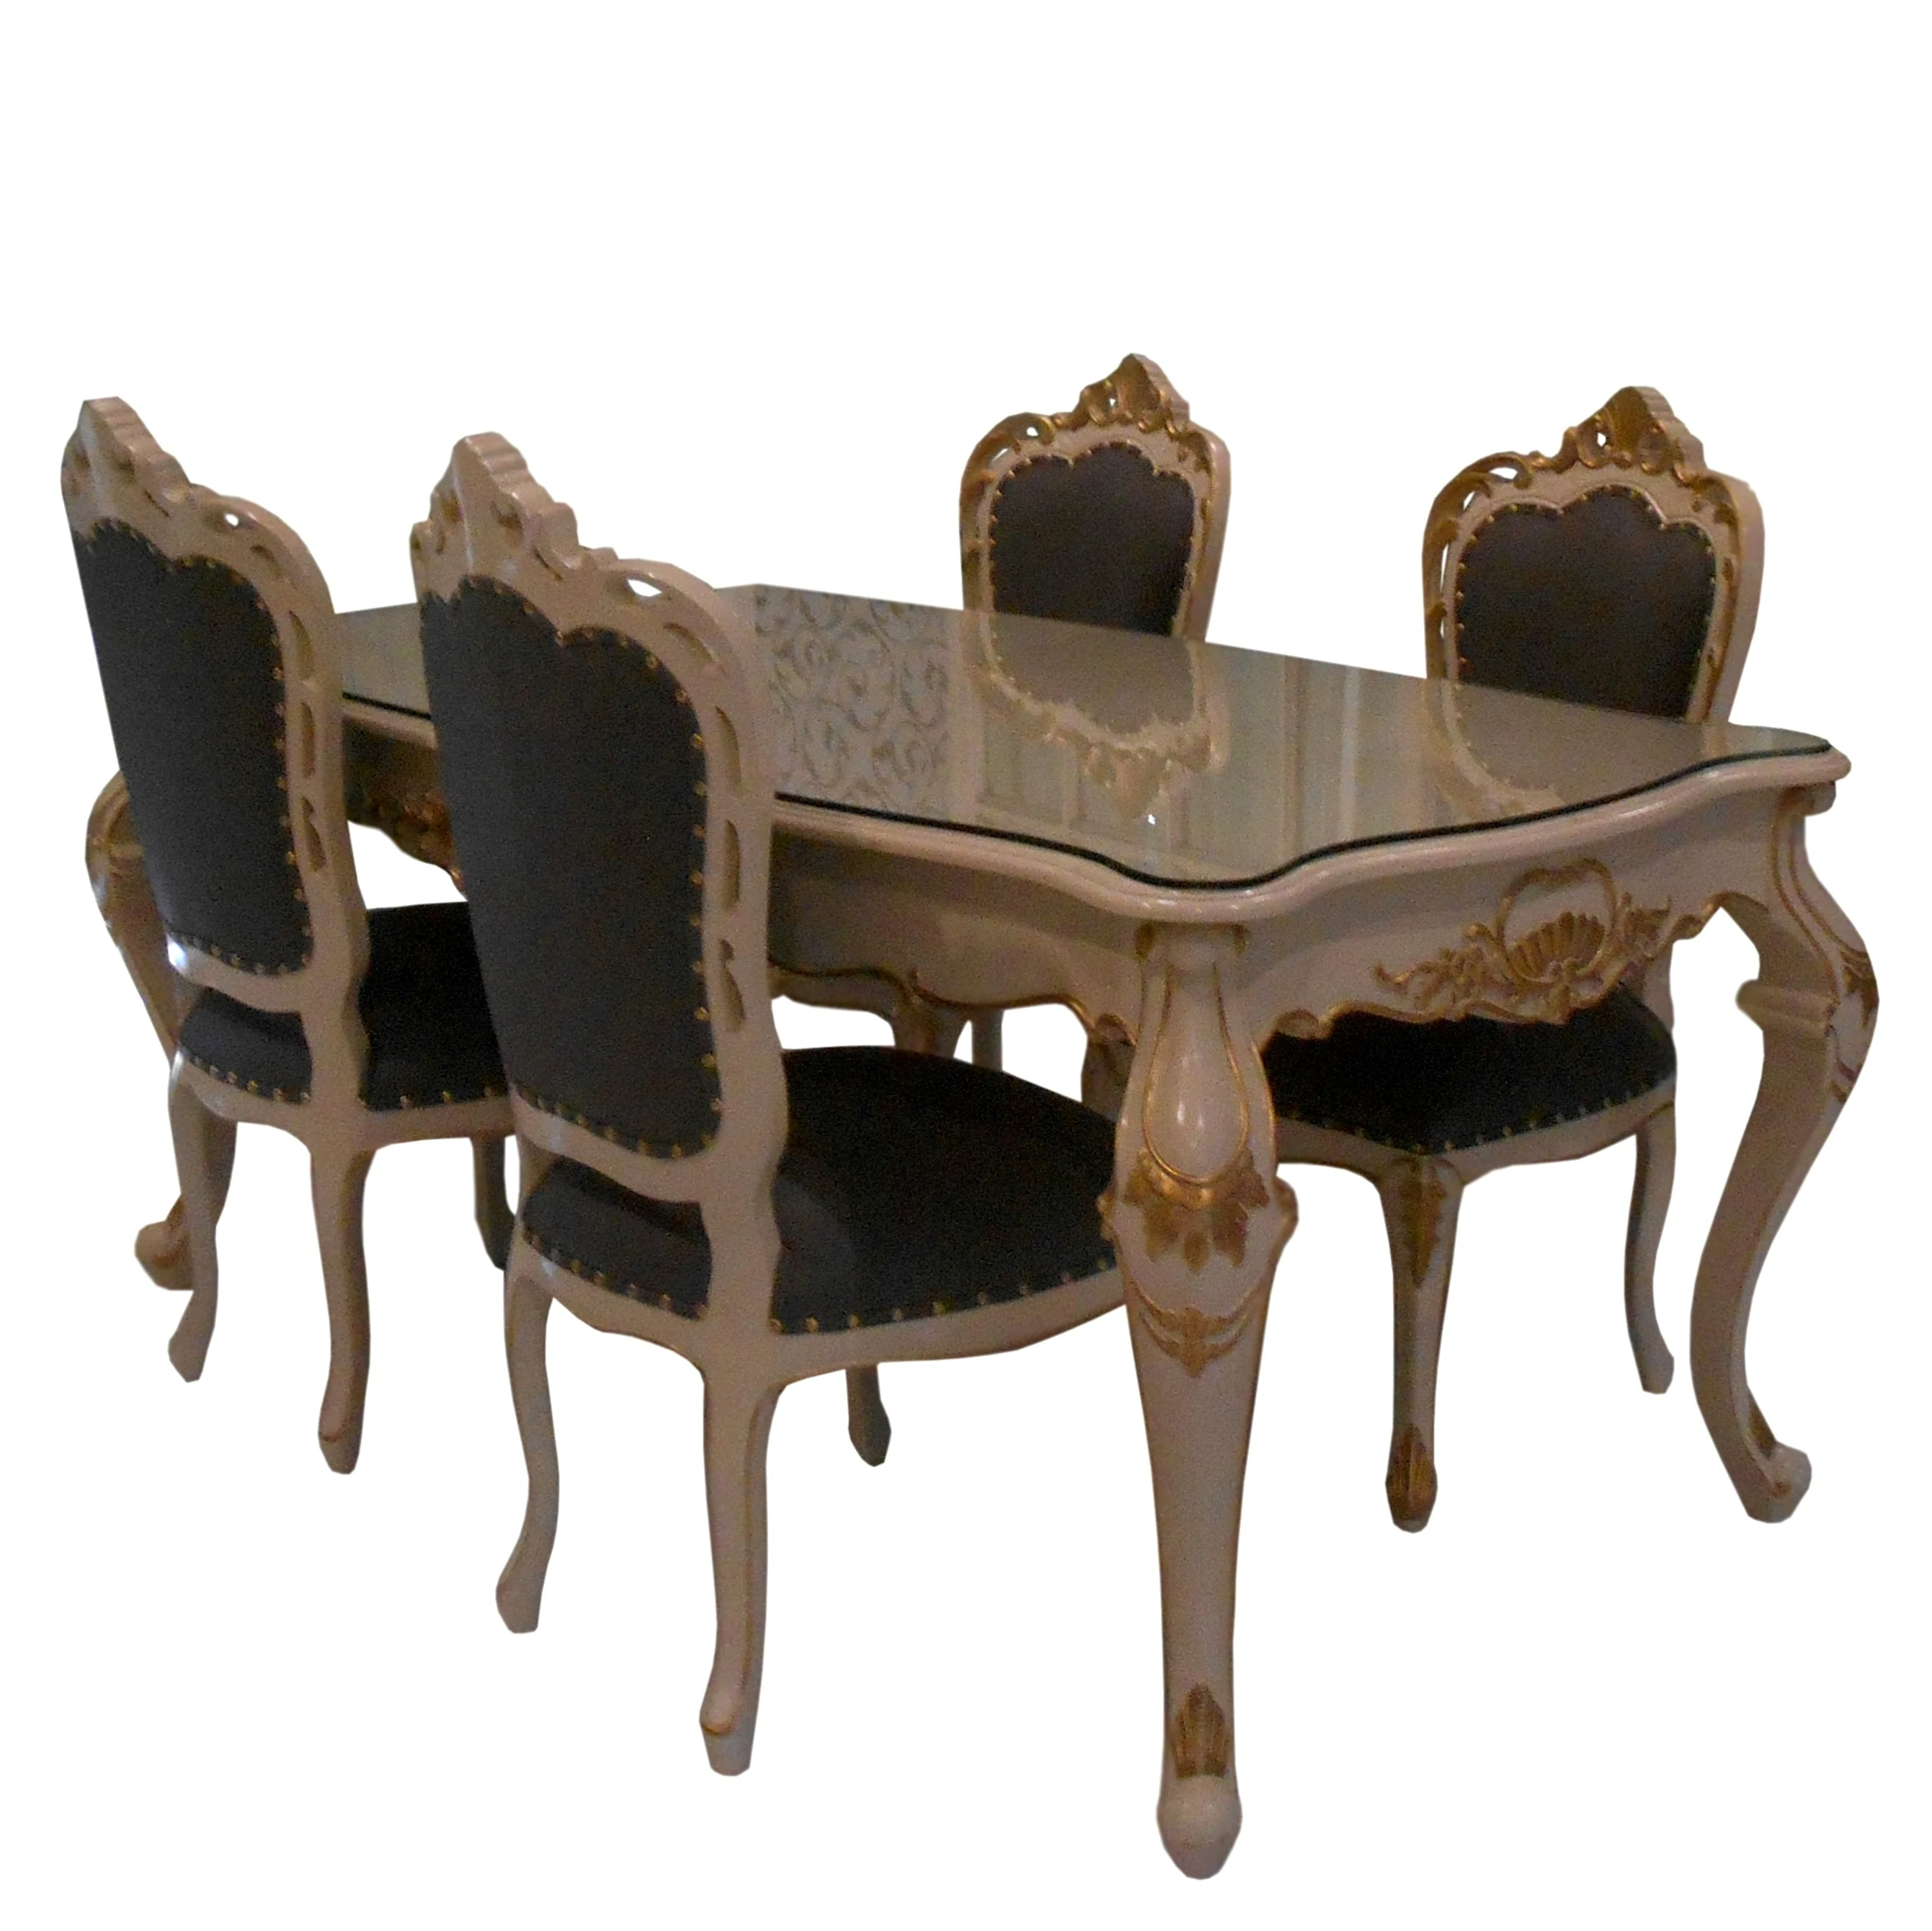 Luxury Carved Furniture Dining Room Table Set - Solid Wood Mahogany Furniture